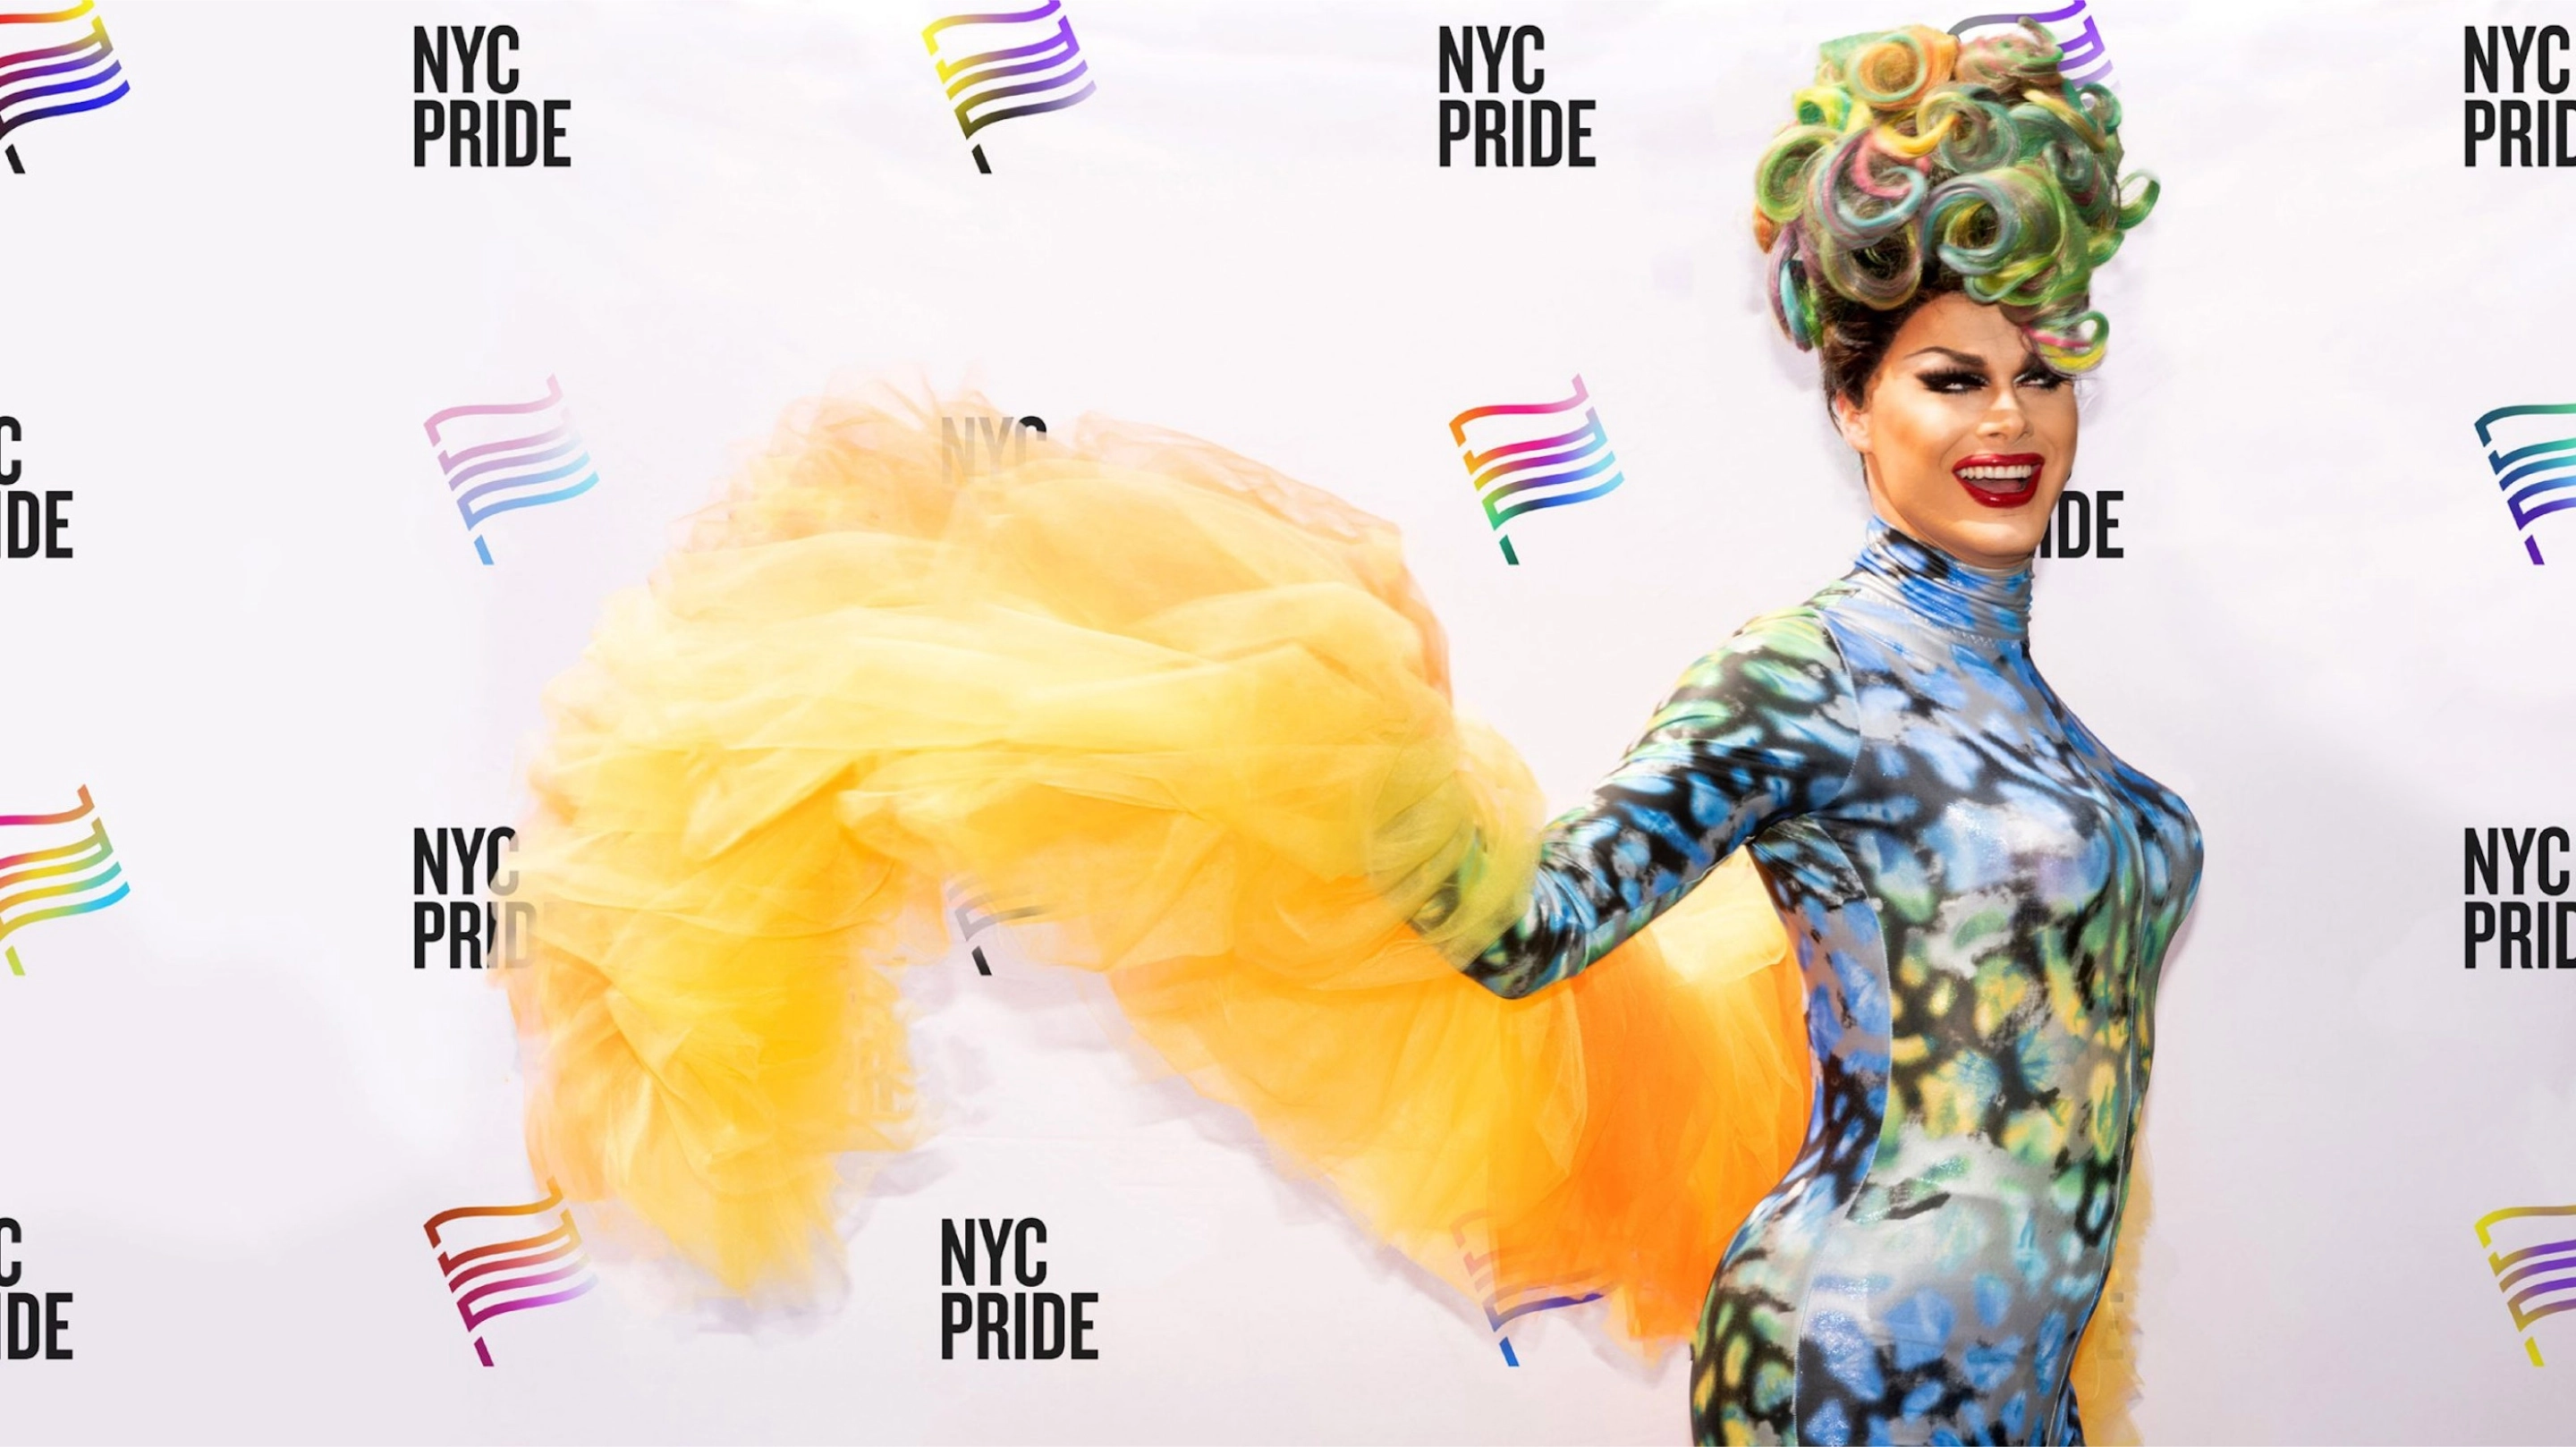 NYC Pride, Step and Repeat